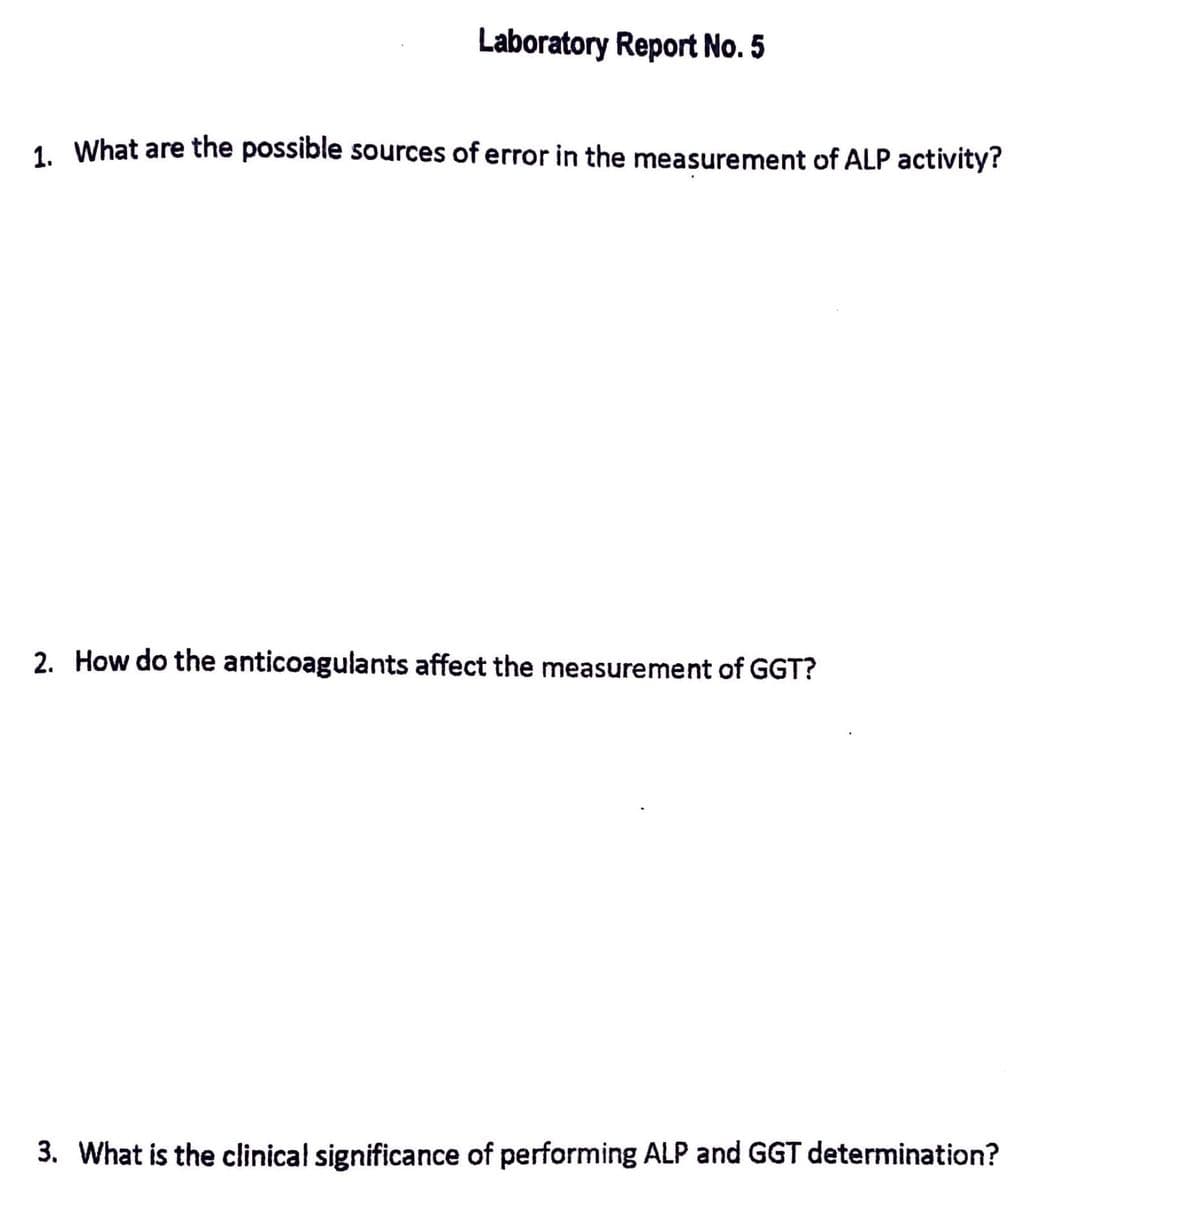 Laboratory Report No. 5
1. What are the possible sources of error in the measurement of ALP activity?
2. How do the anticoagulants affect the measurement of GGT?
3. What is the clinical significance of performing ALP and GGT determination?